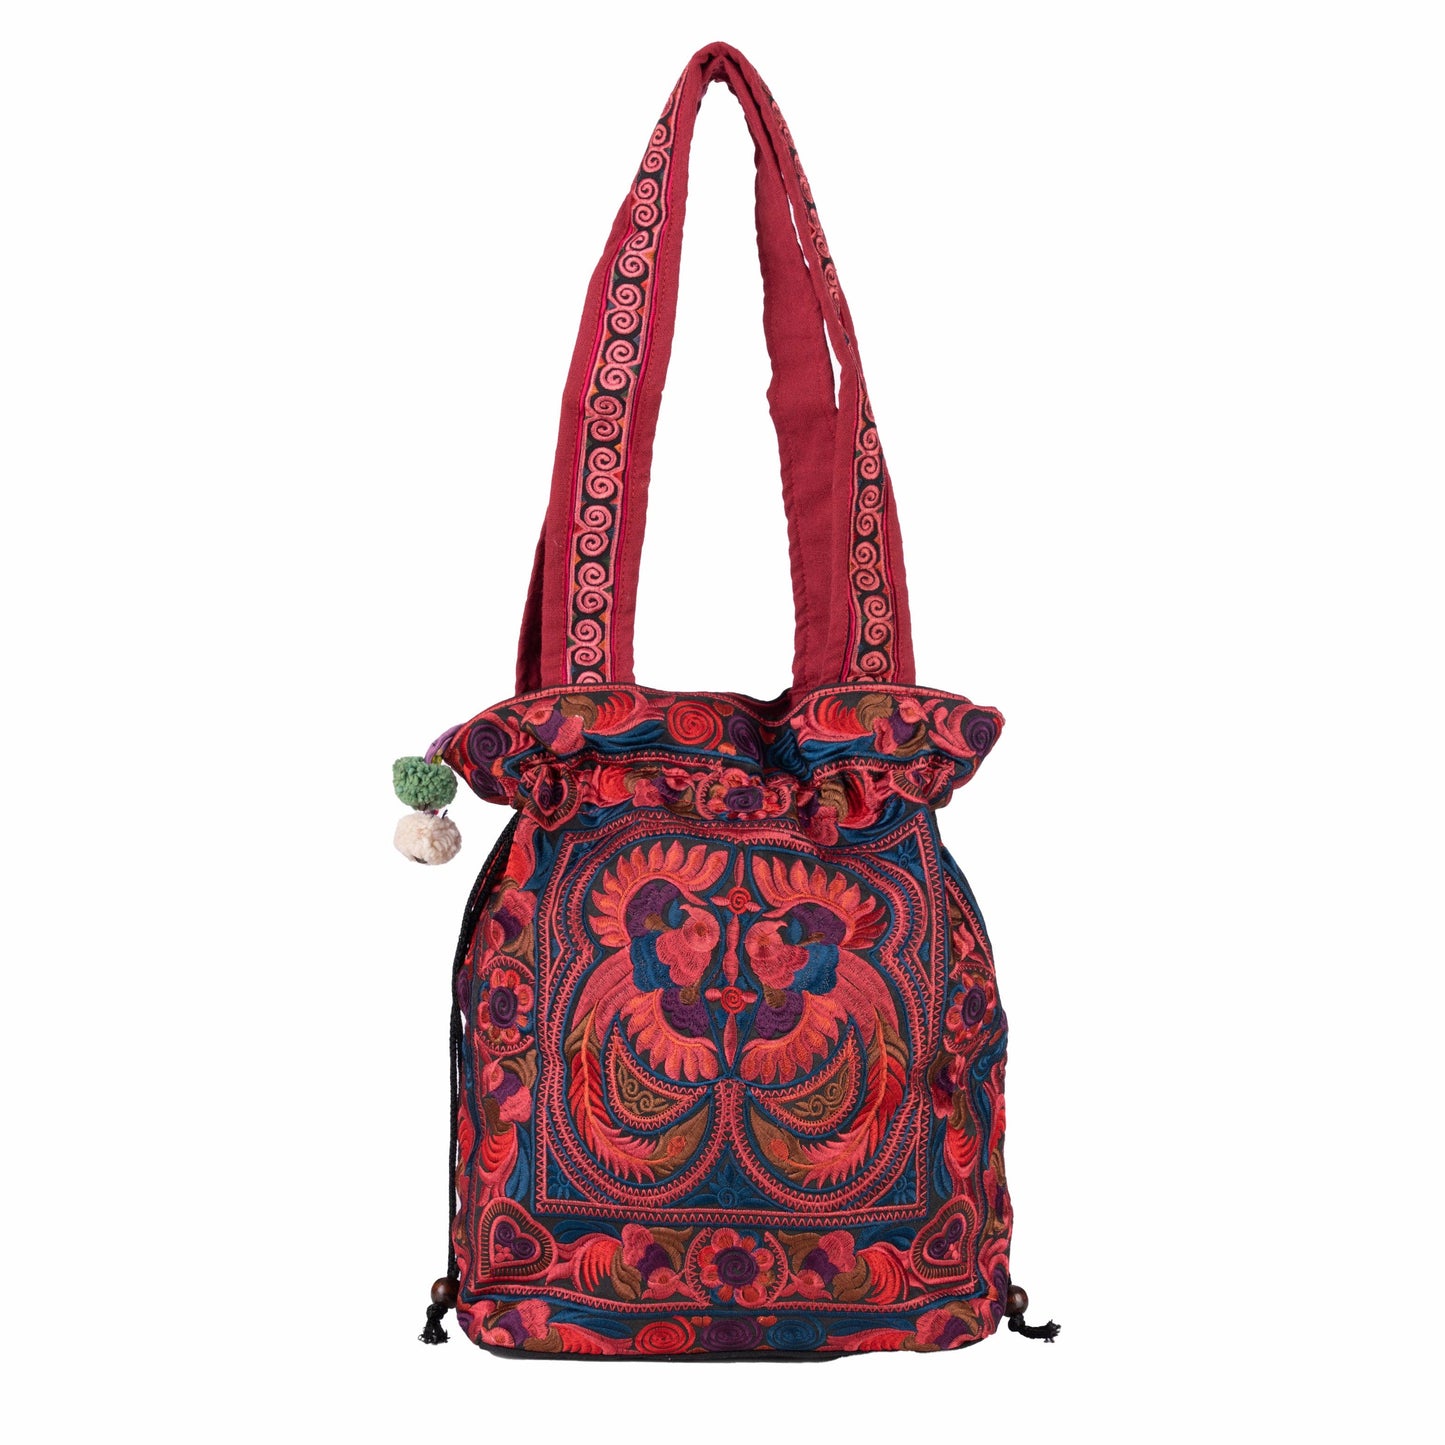 Embroidered Drawstring Tote Bag (Various Colors/Designs)